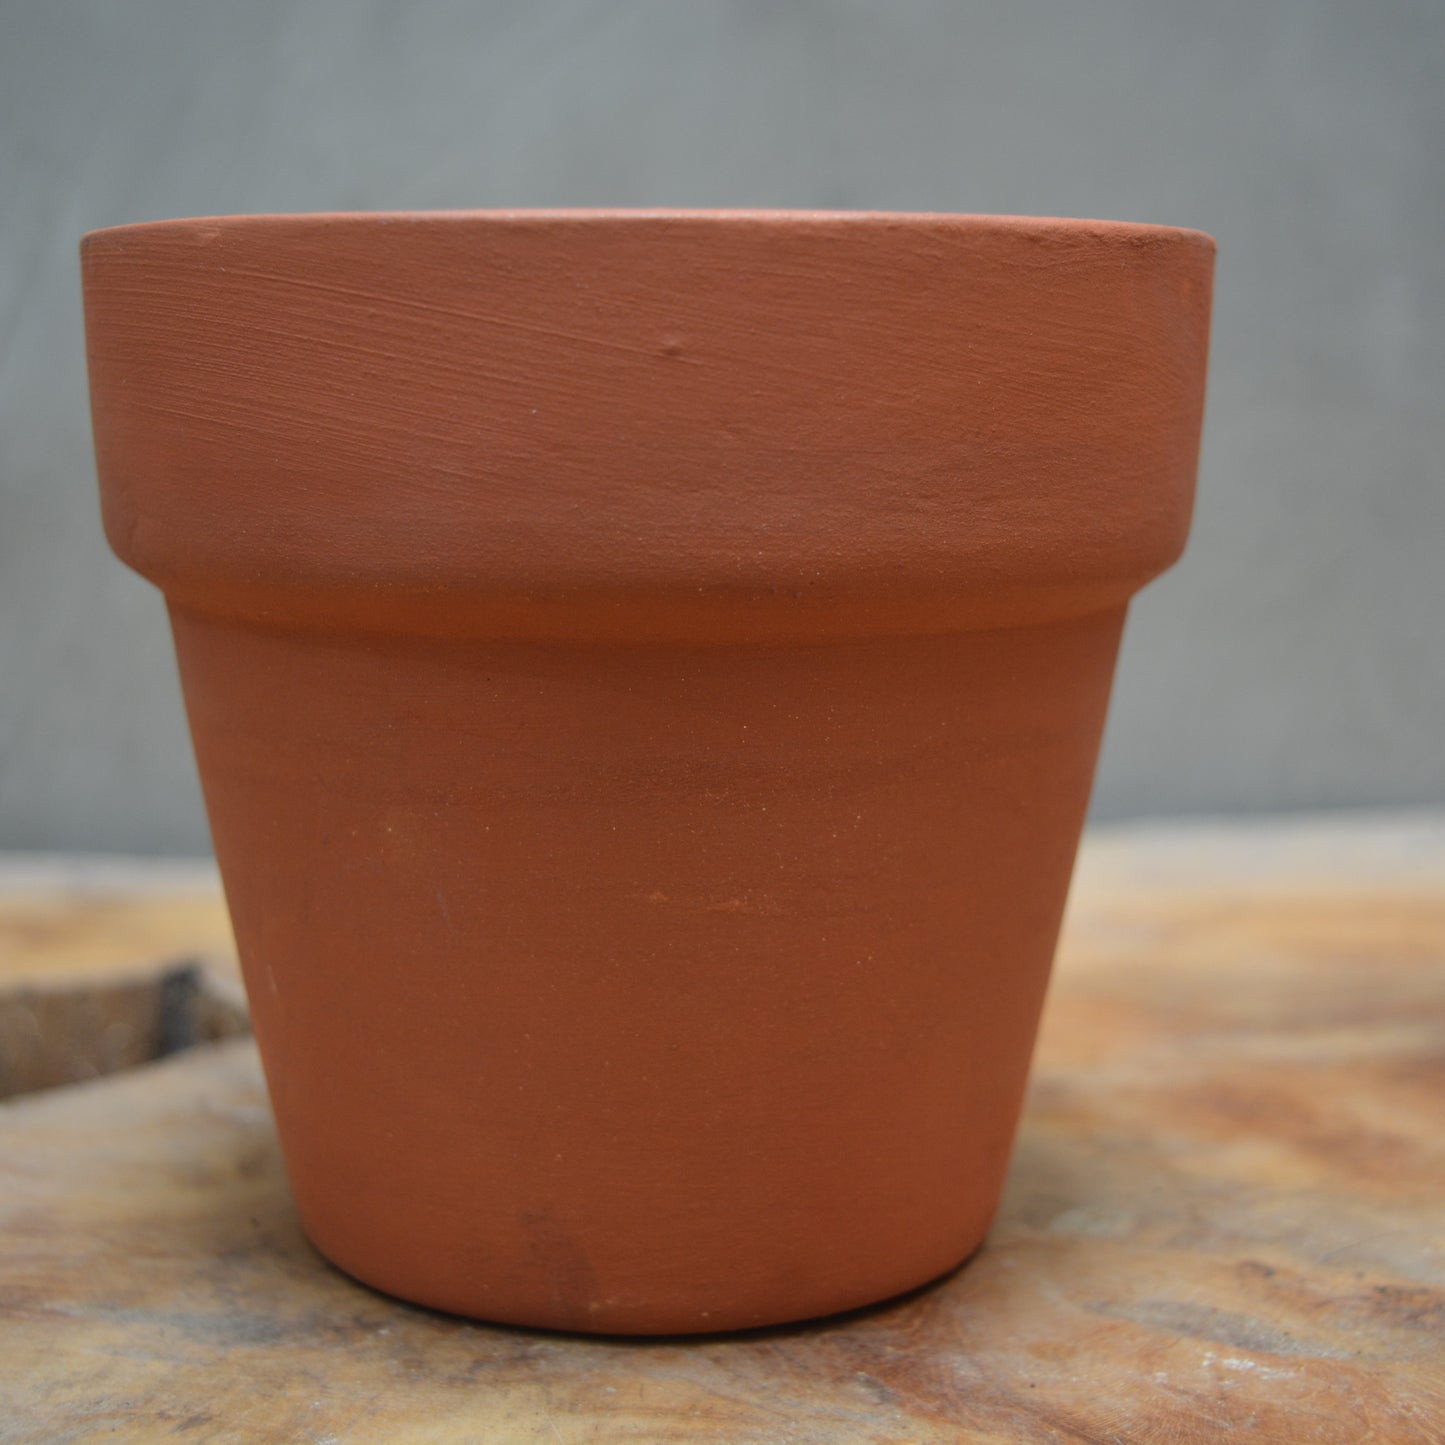 Terracotta-4.5 inch-Stackable (With  saucer)